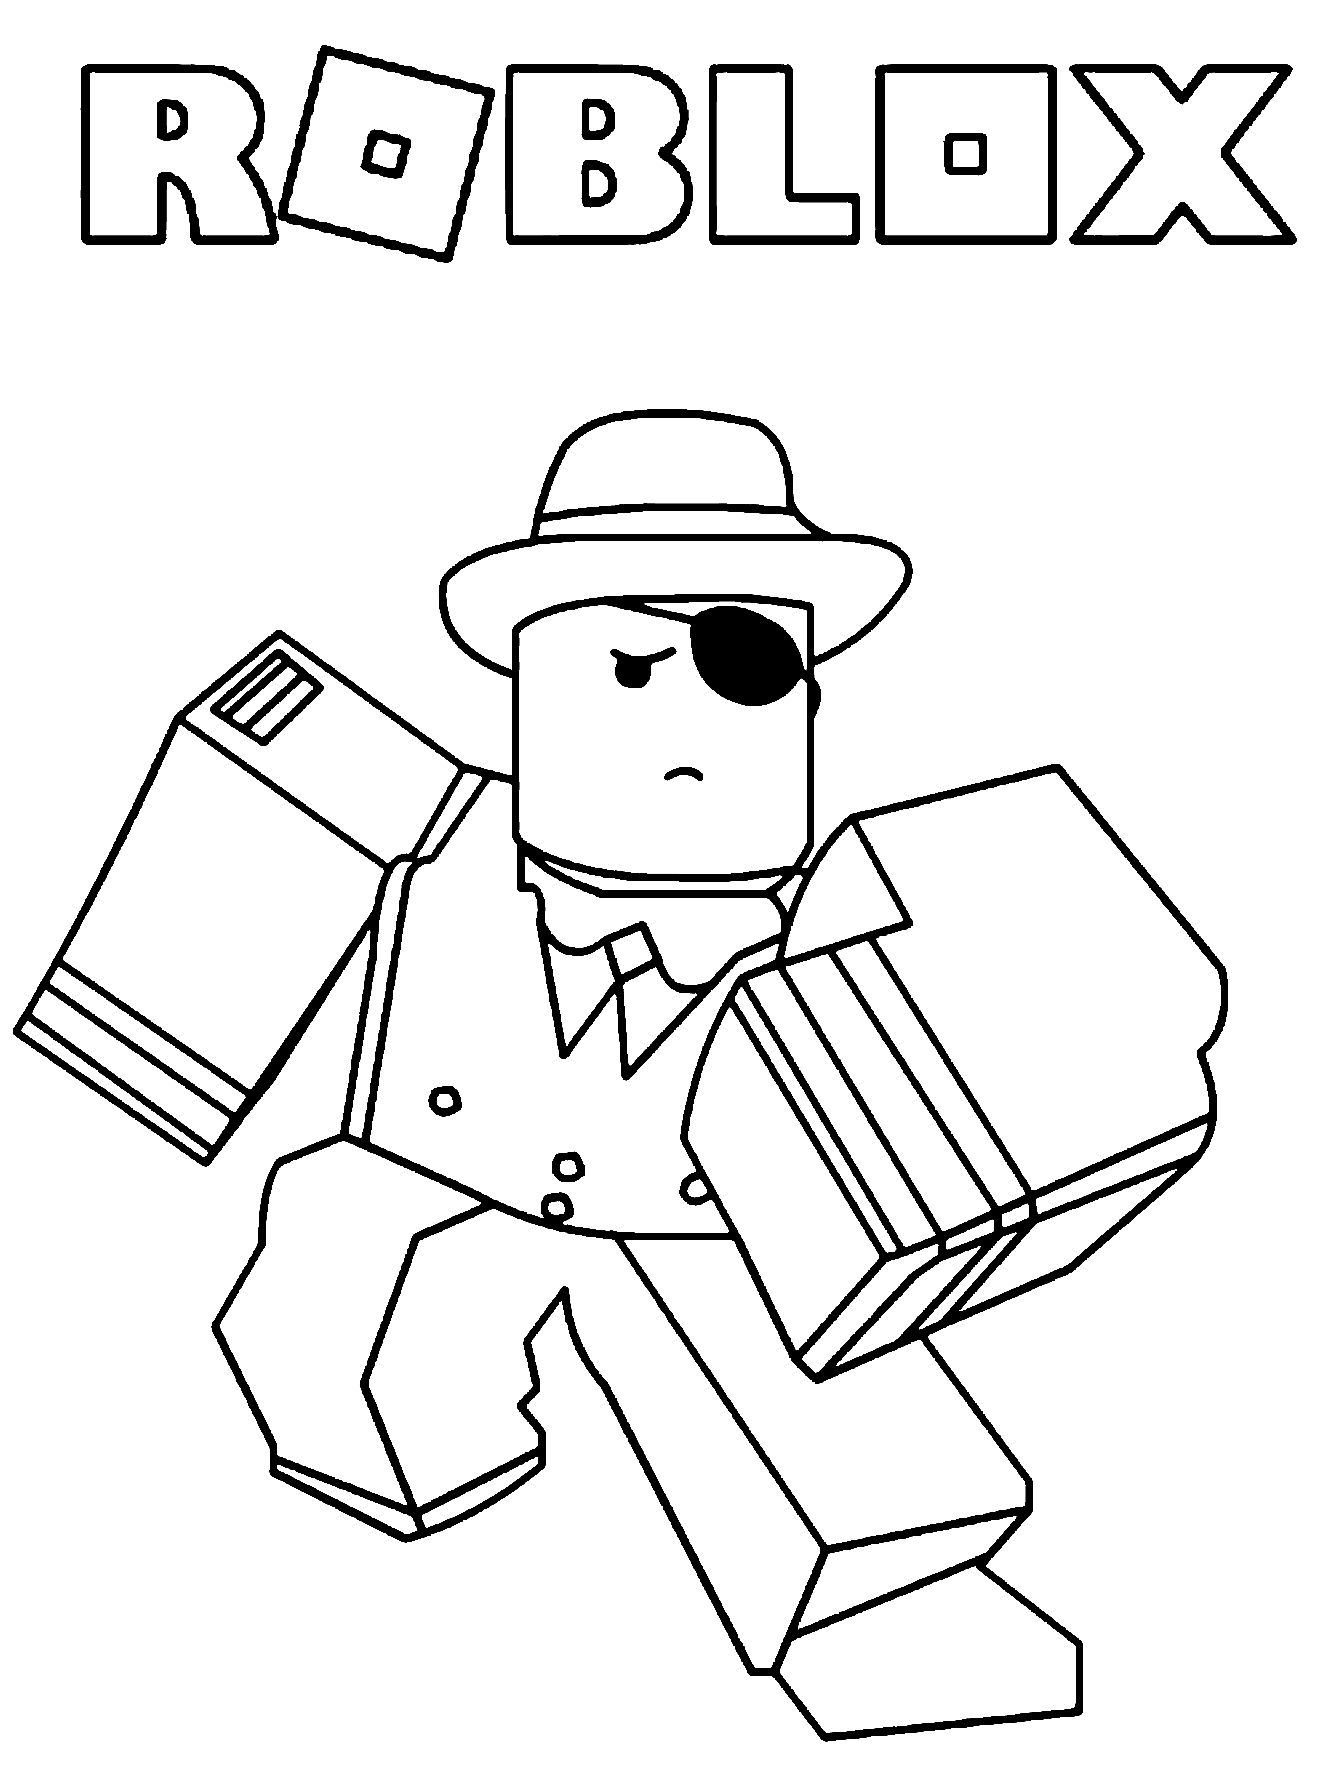 Roblox Coloring Pages - Coloring Pages For Kids And Adults